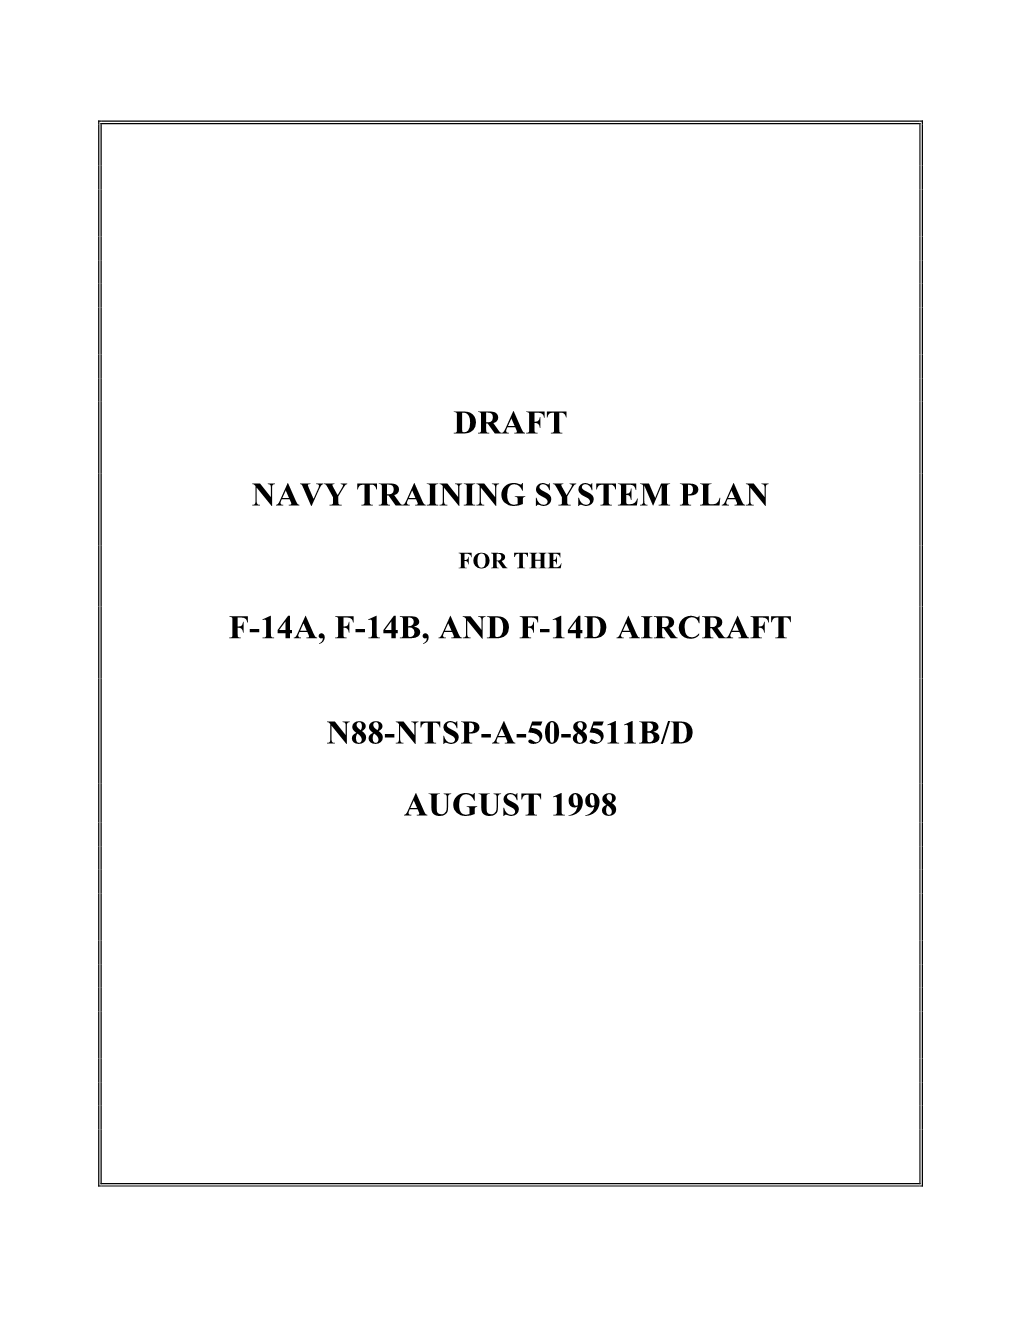 Draft Navy Training System Plan F-14A, F-14B, and F-14D